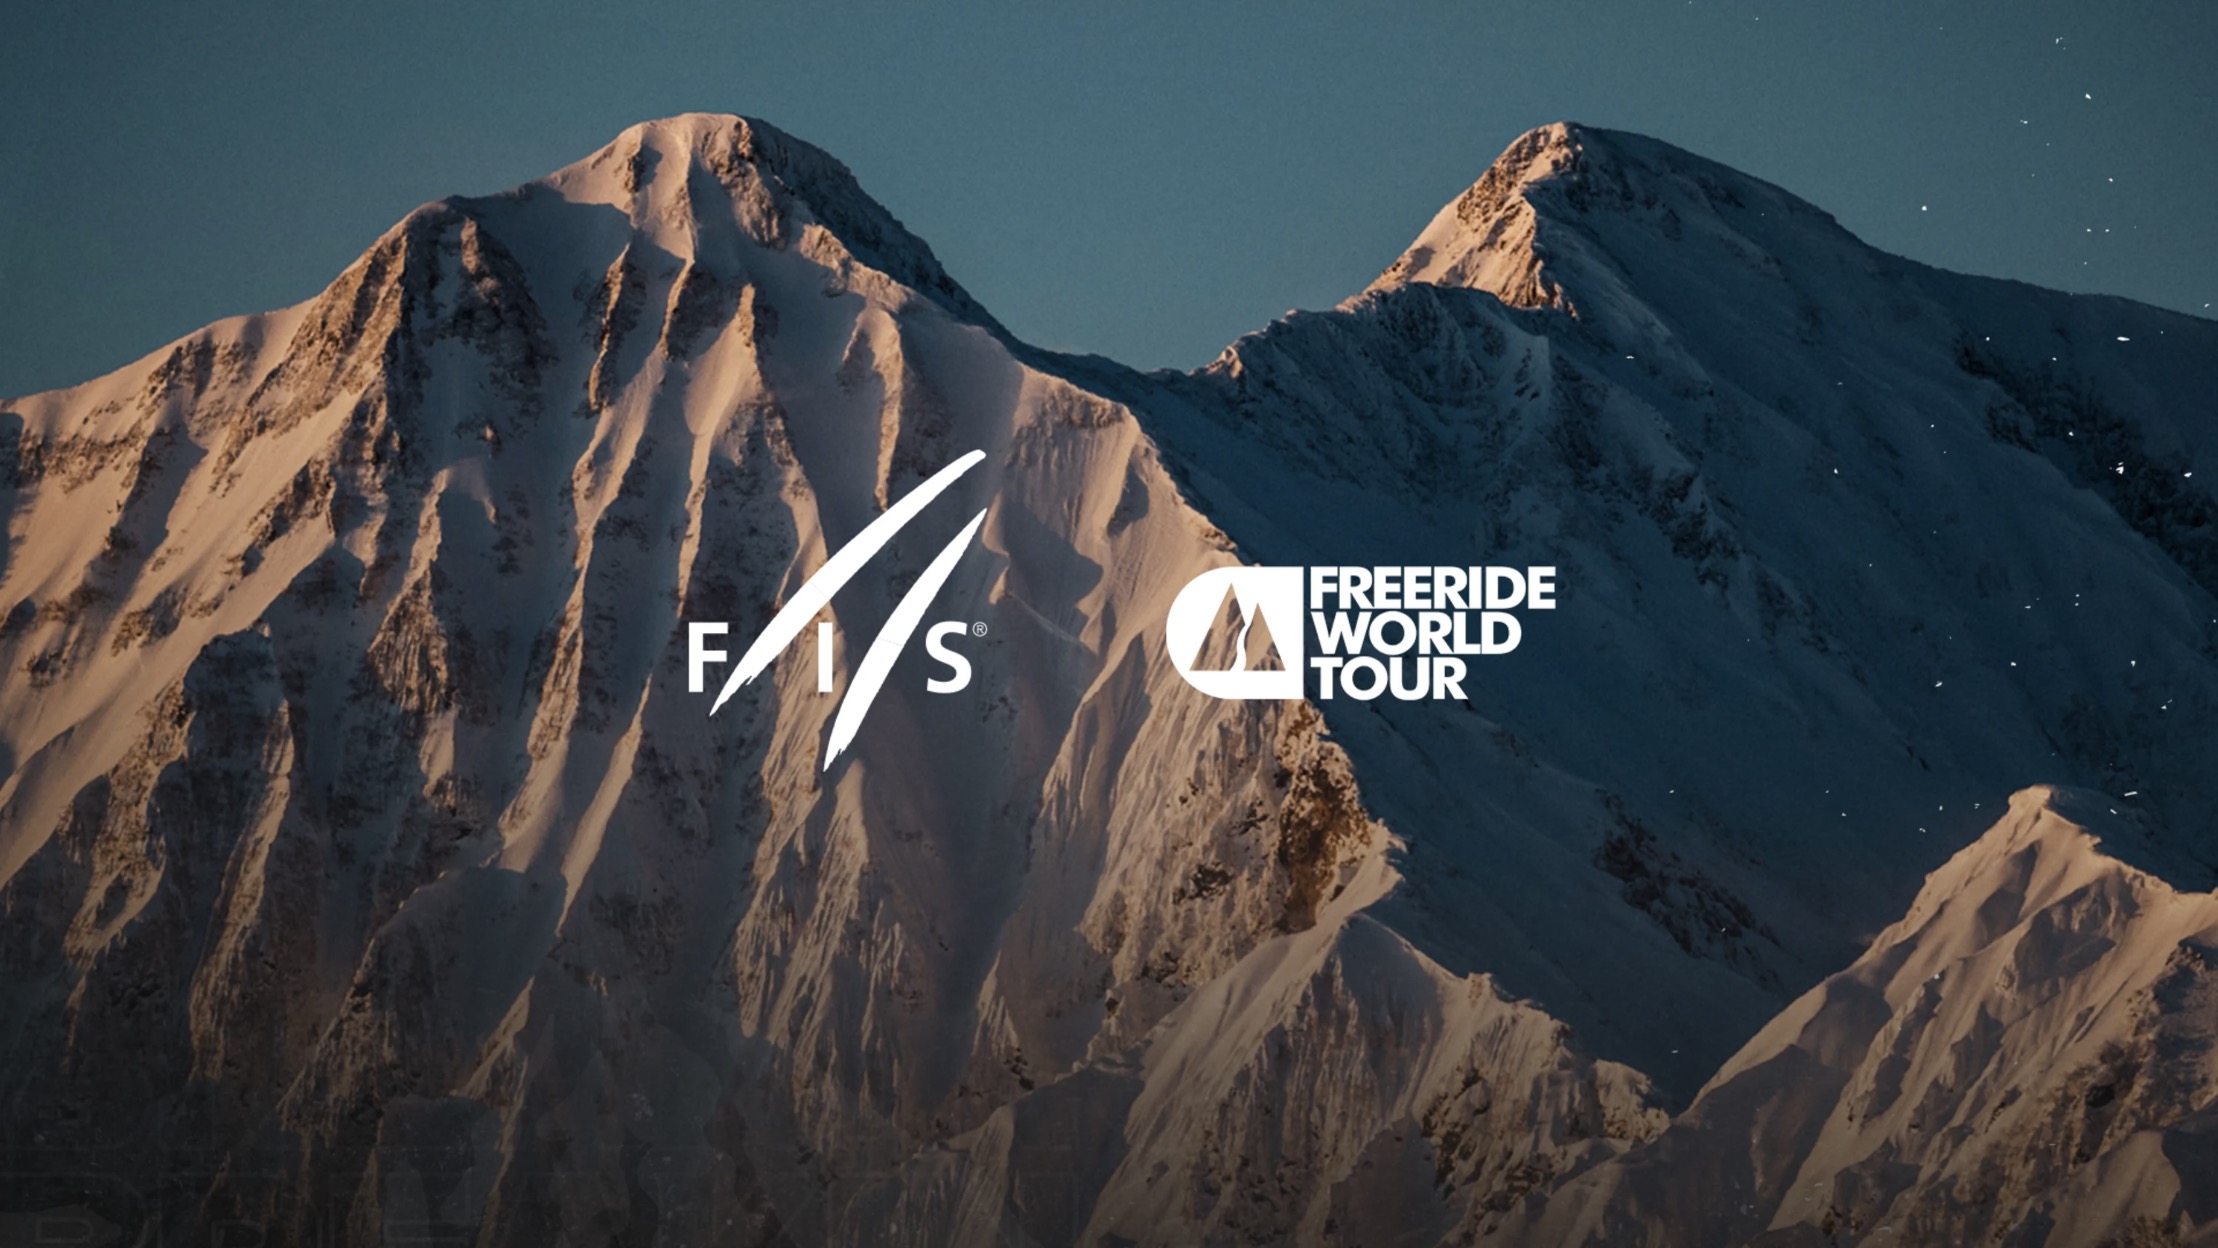 A New Era of Freeriding: FIS Acquires Freeride World Tour, Paving Road to Olympics